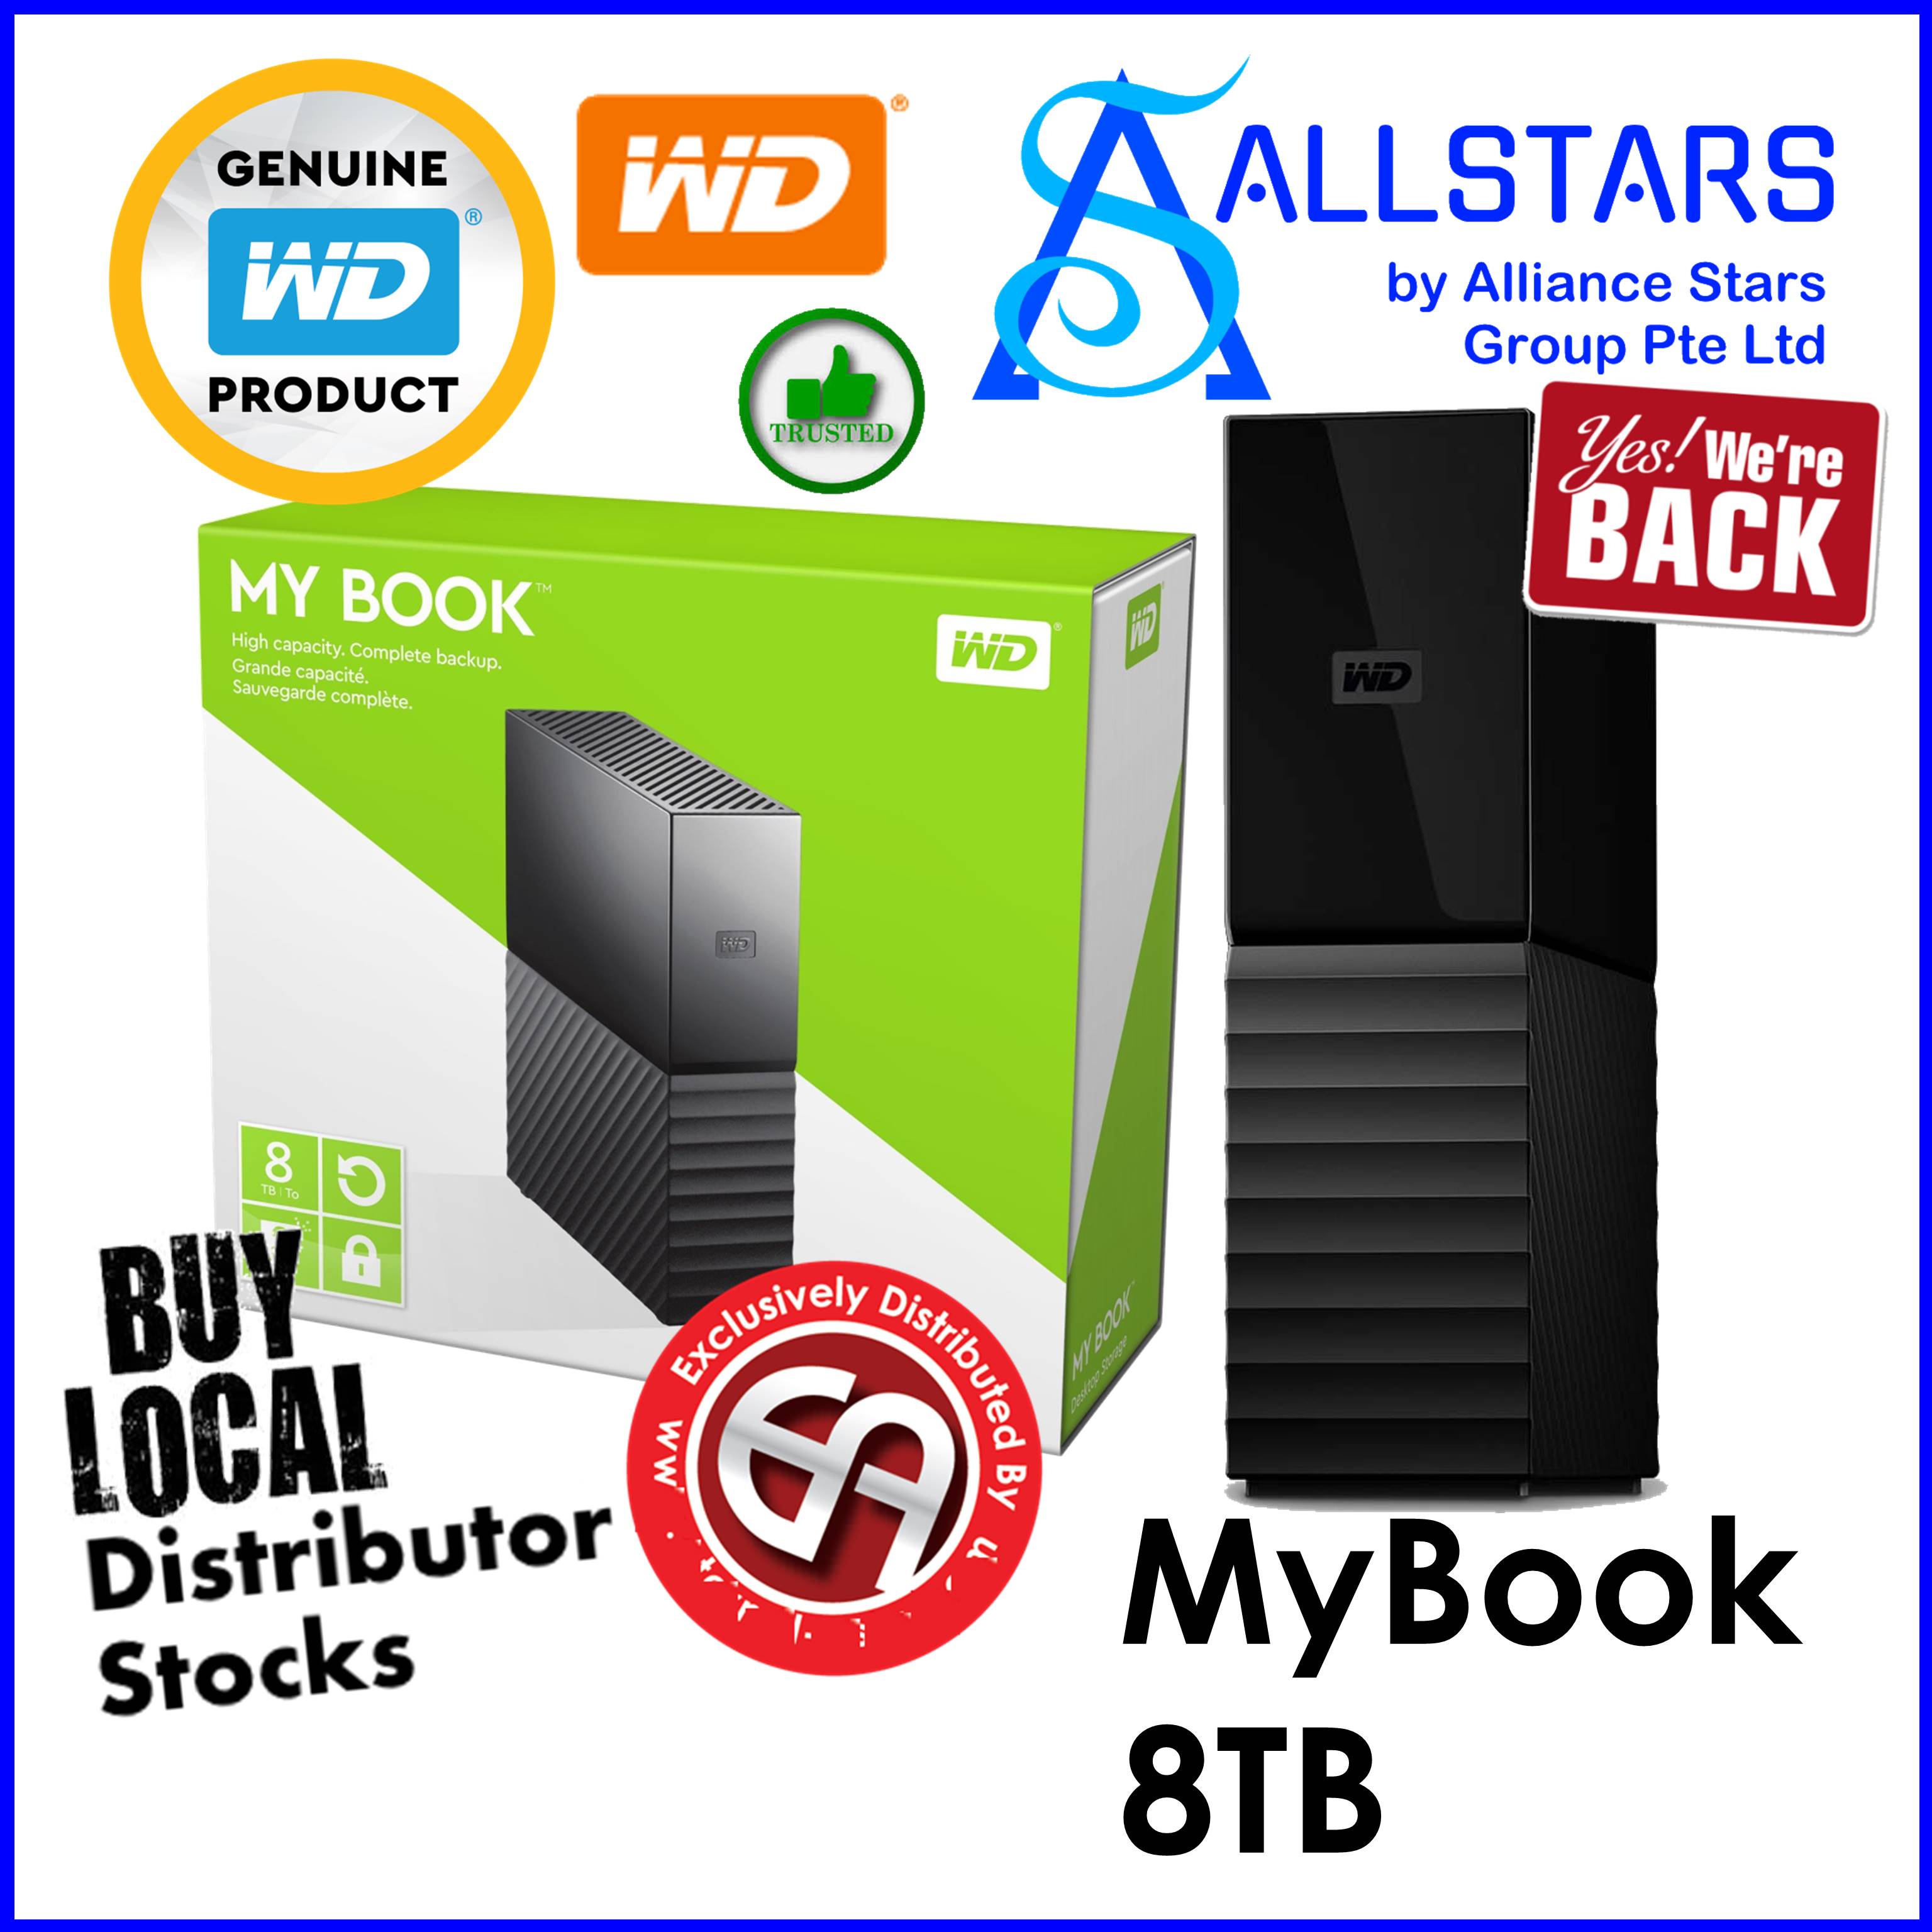 ALLSTARS We are Back PROMO) WD 8TB My Book Desktop External Hard Drive, USB  3.0 (WDBBGB0080HBK) (Warranty 3years directly with WD Singapore) Lazada  Singapore